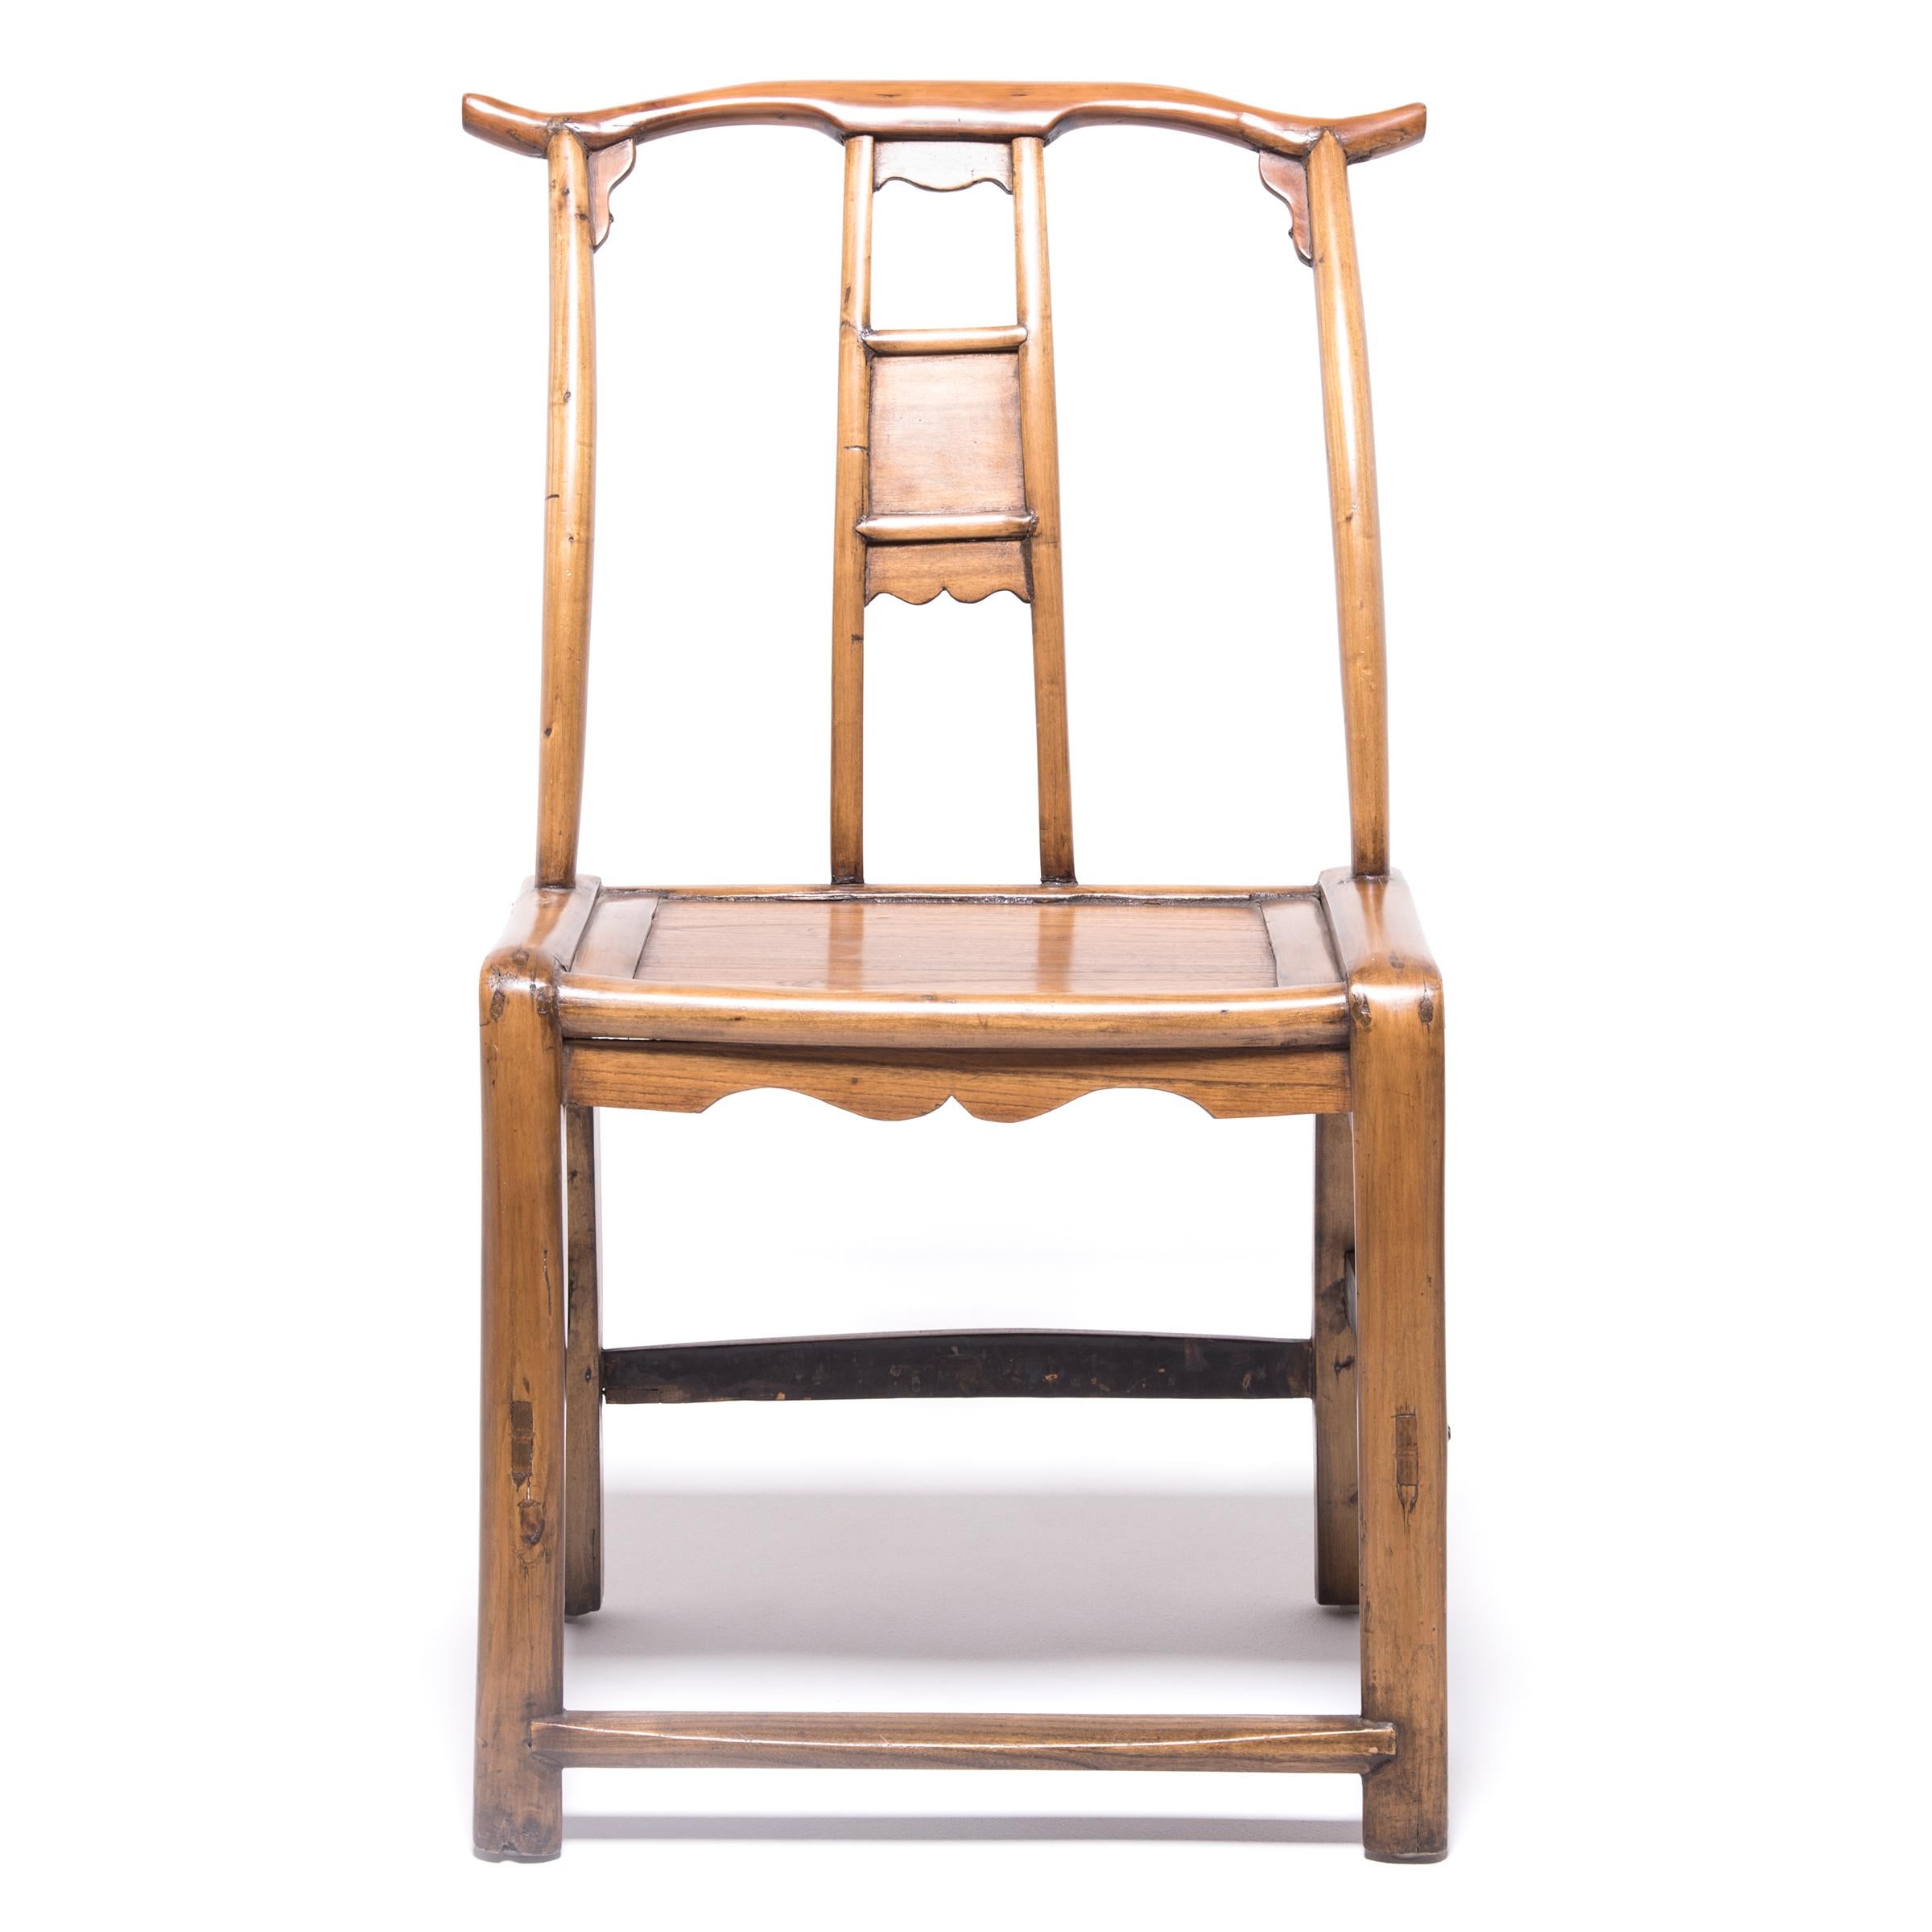 Qing Pair of Chinese Provincial Bentform Chairs, c. 1850 For Sale